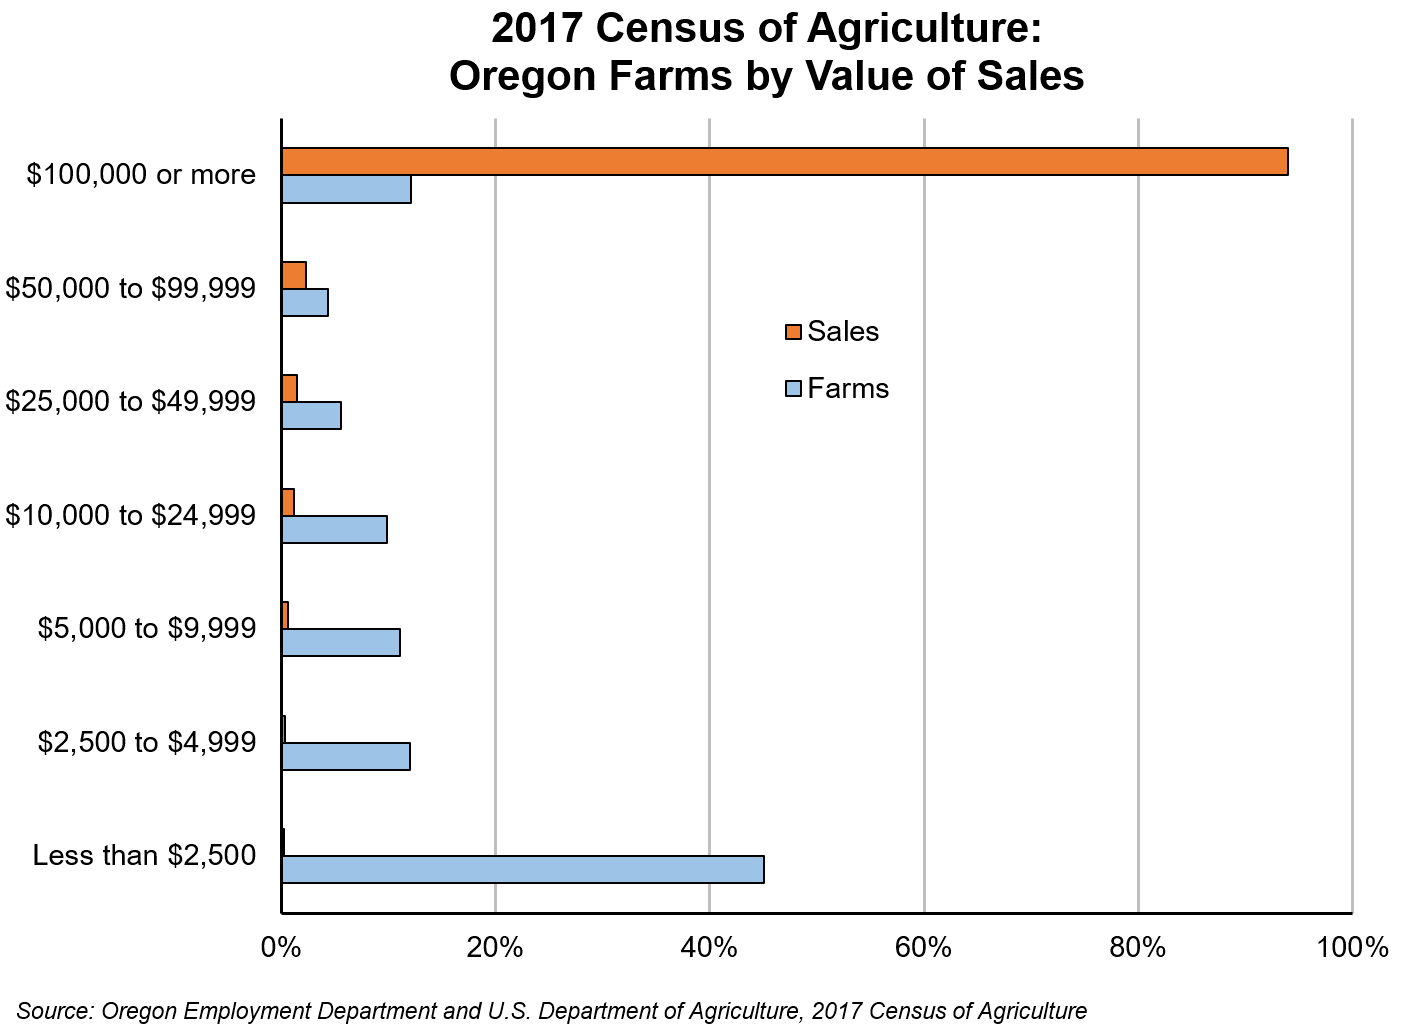 Graph showing 2017 Census of Agriculture: Oregon Farms by Value of Sales